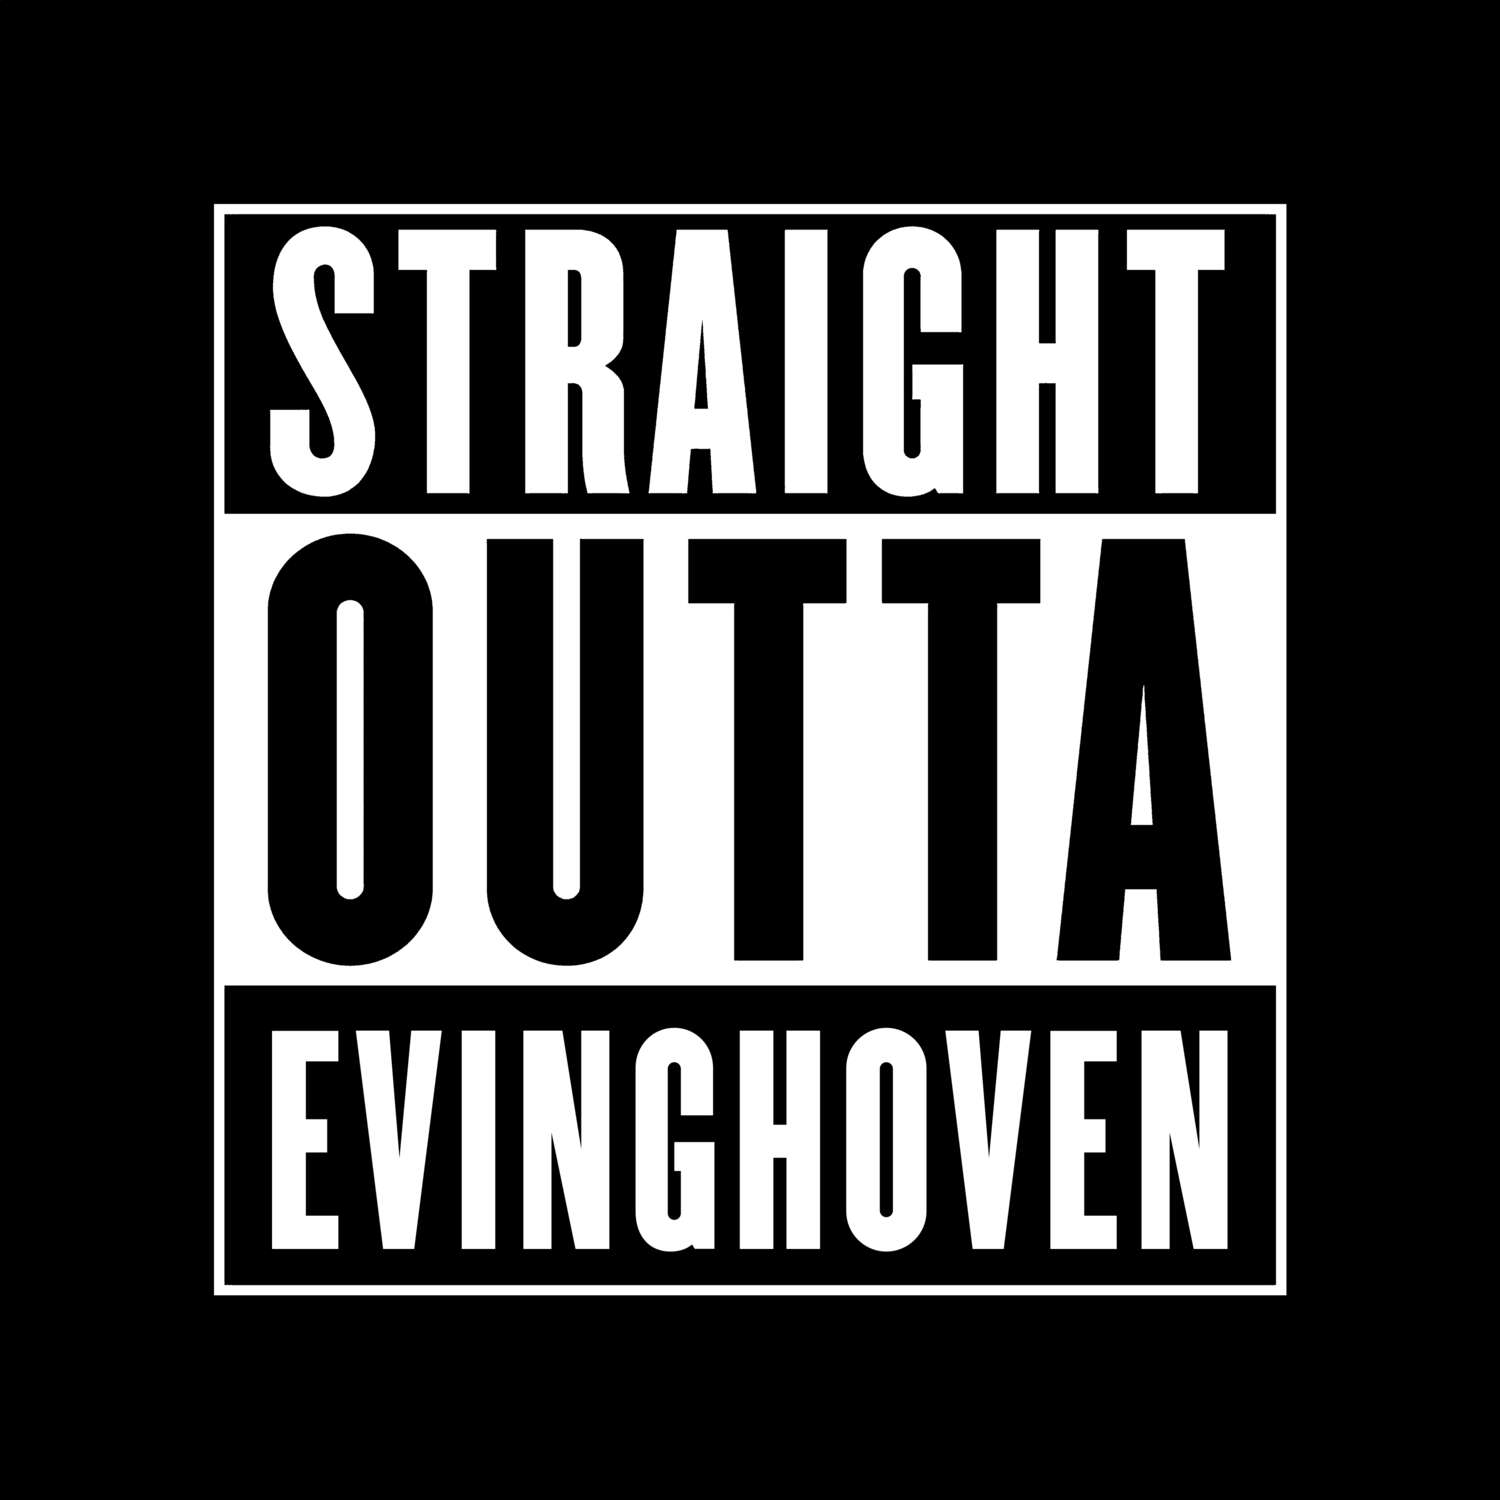 Evinghoven T-Shirt »Straight Outta«